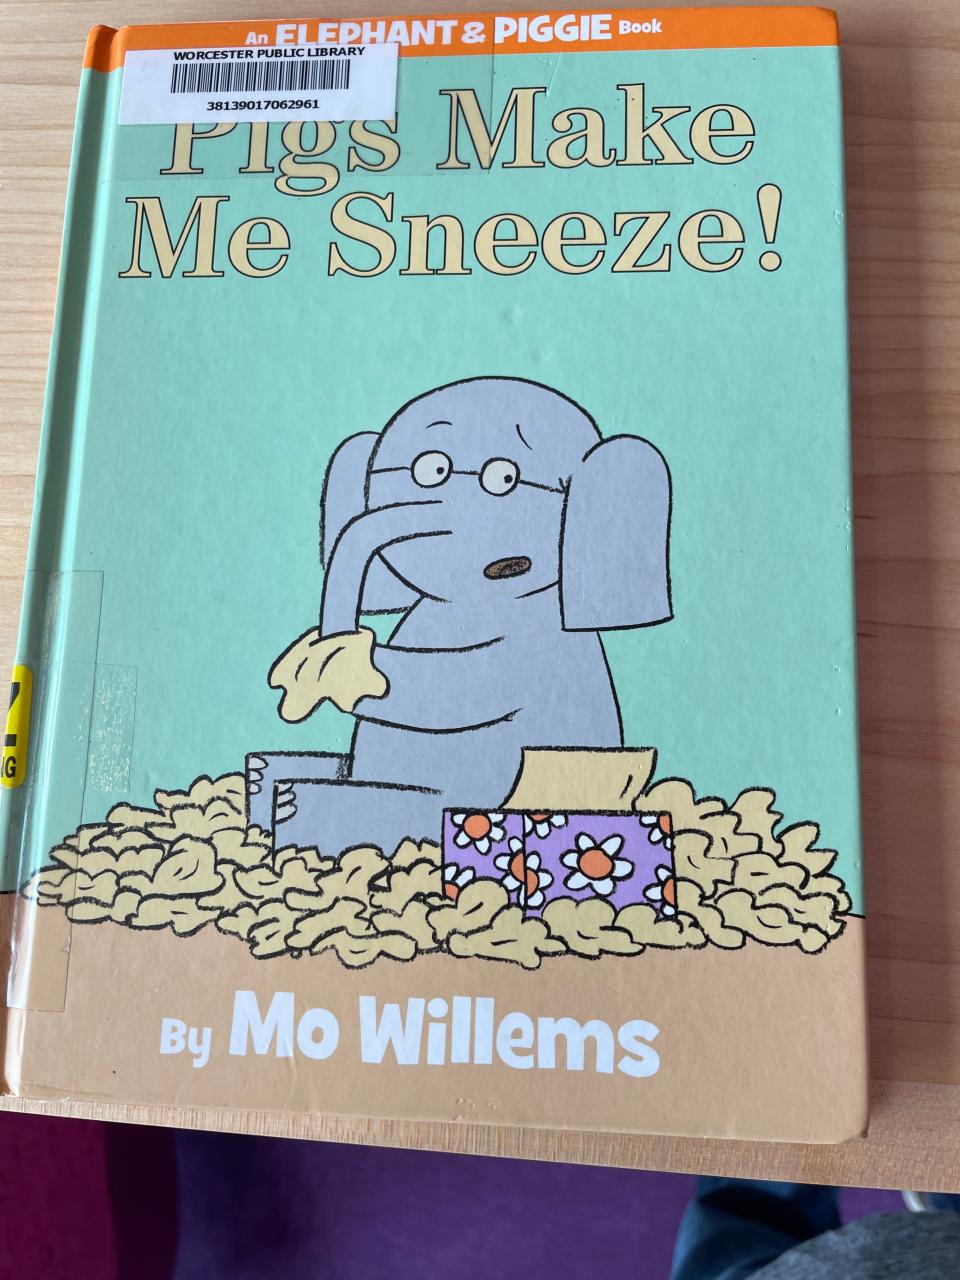 "Pigs Make Me Sneeze!" by Mo Willems